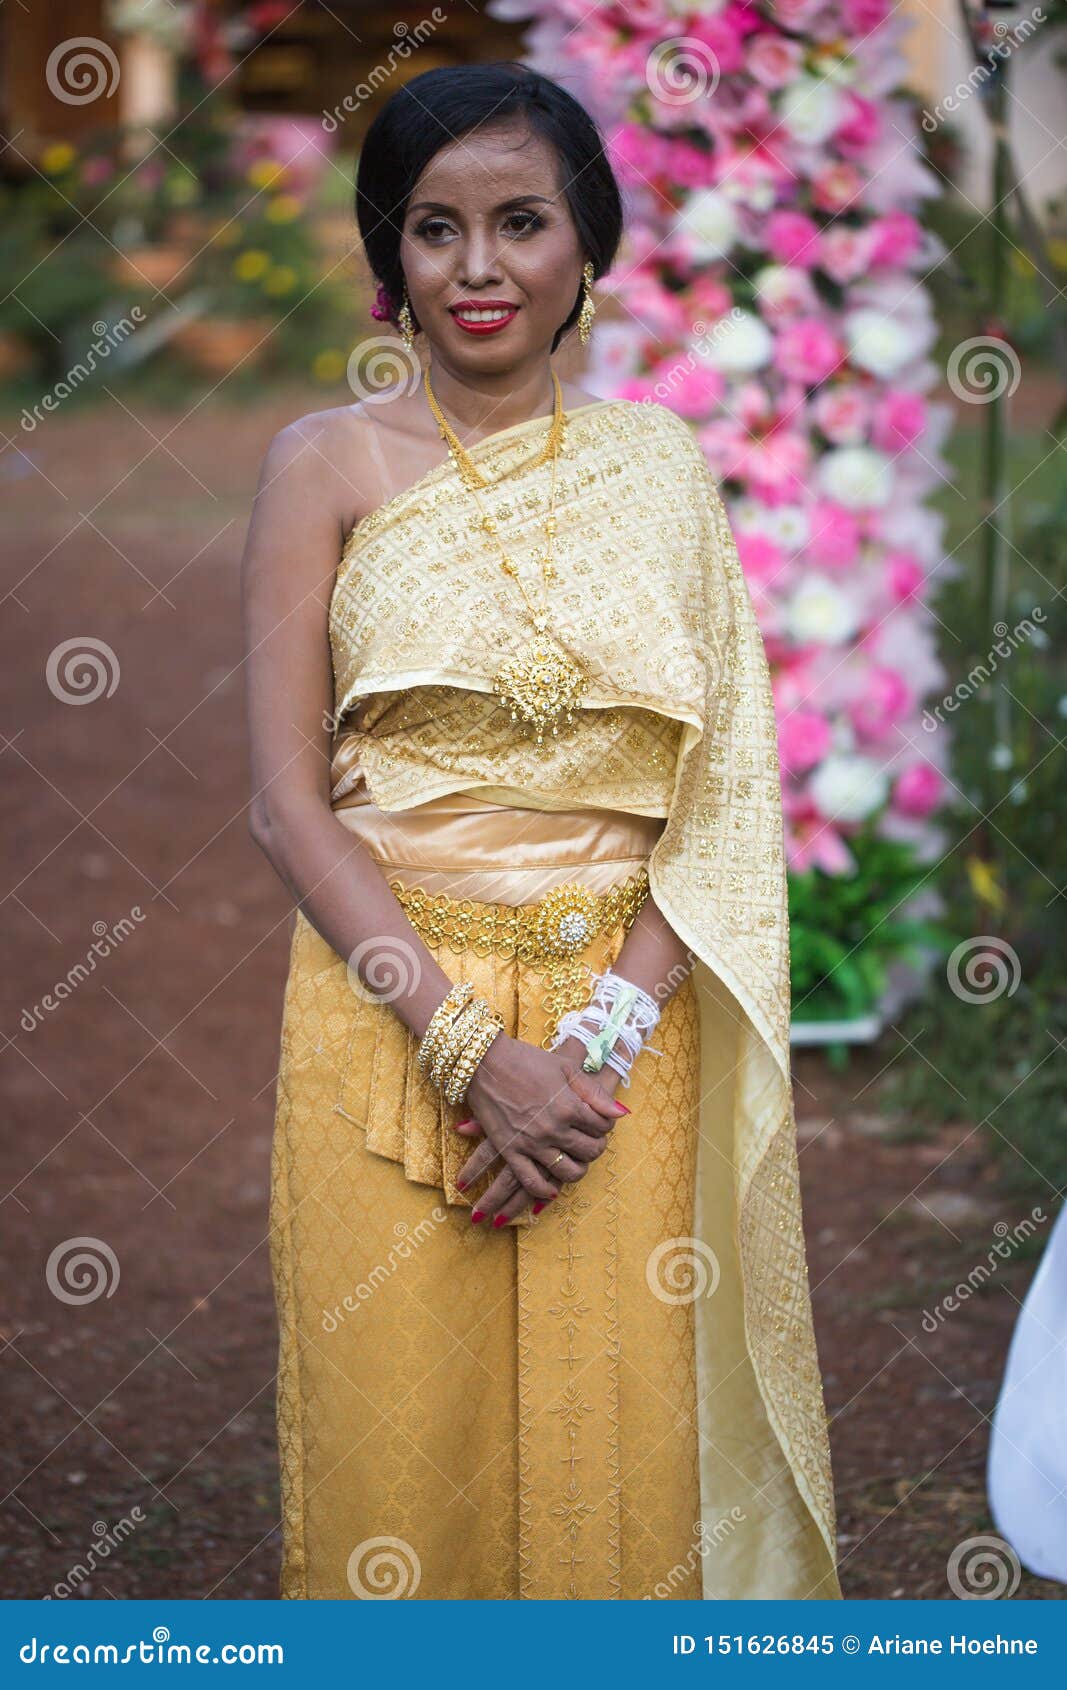 https://thumbs.dreamstime.com/z/beautiful-thai-bride-wedding-day-beautiful-smiling-thai-bride-wedding-day-wearing-typical-buddhism-wedding-151626845.jpg